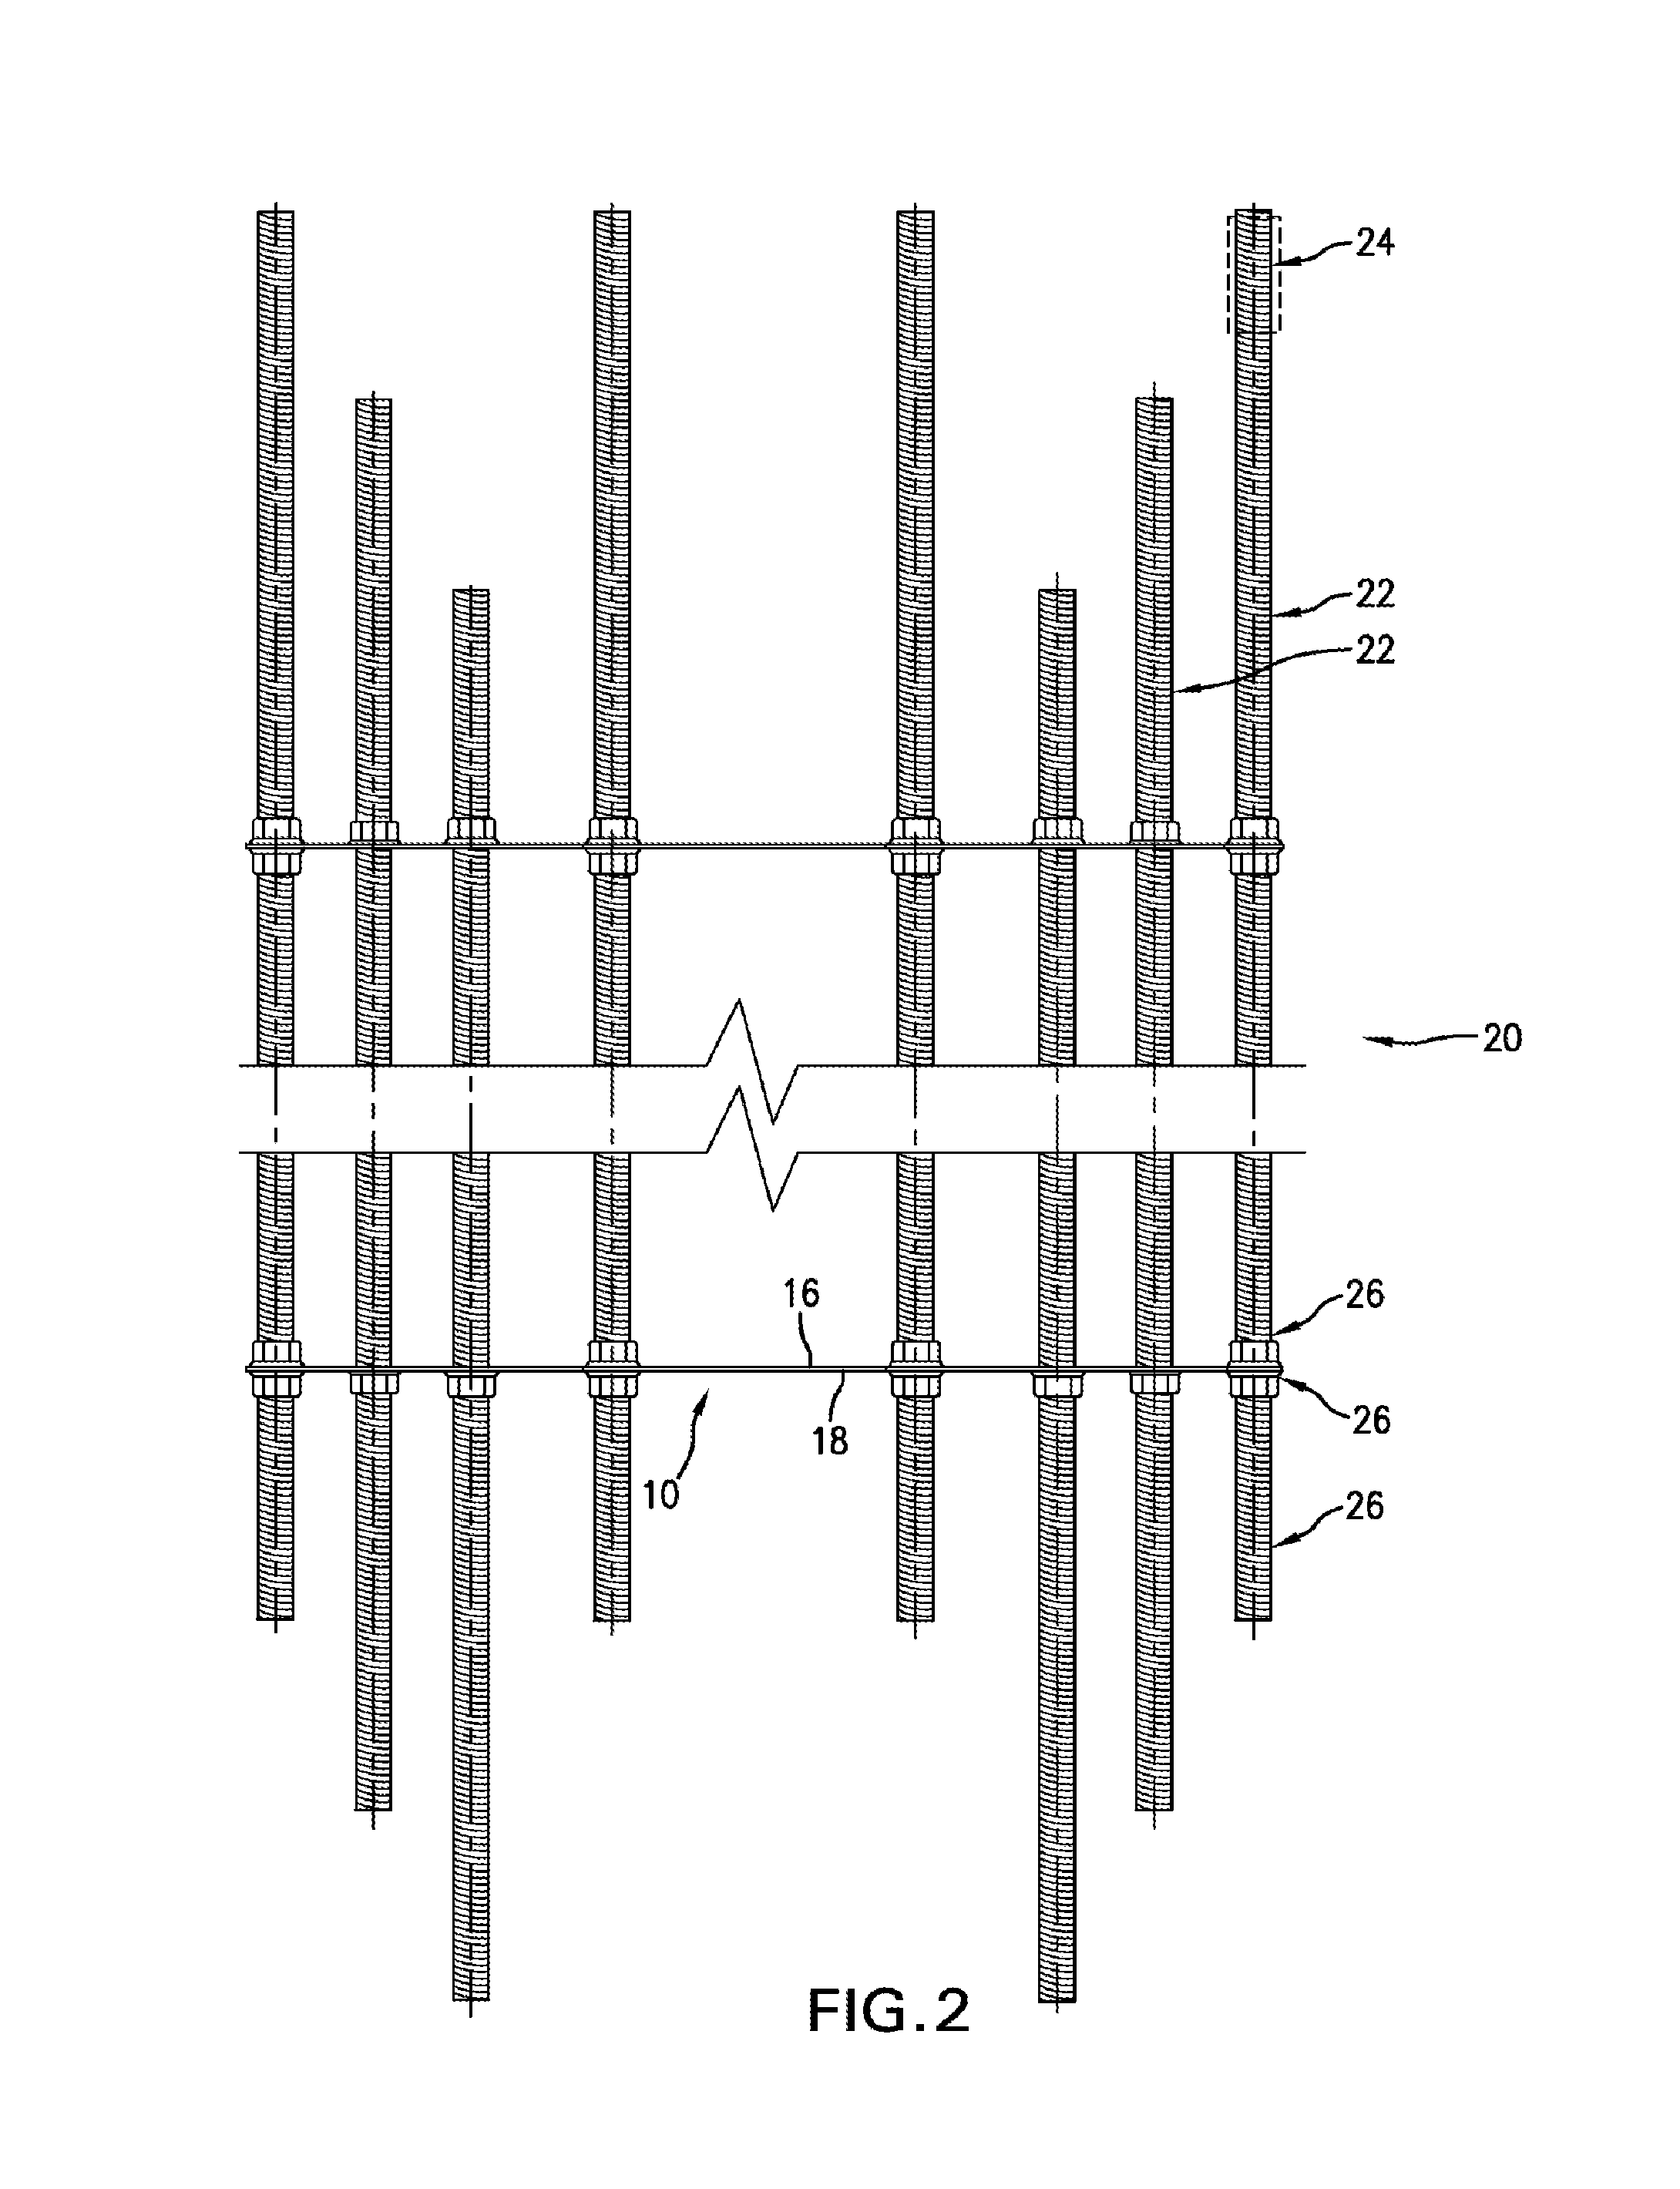 Methods for construction of pre-fabricated modular reinforcement cages for concrete structures